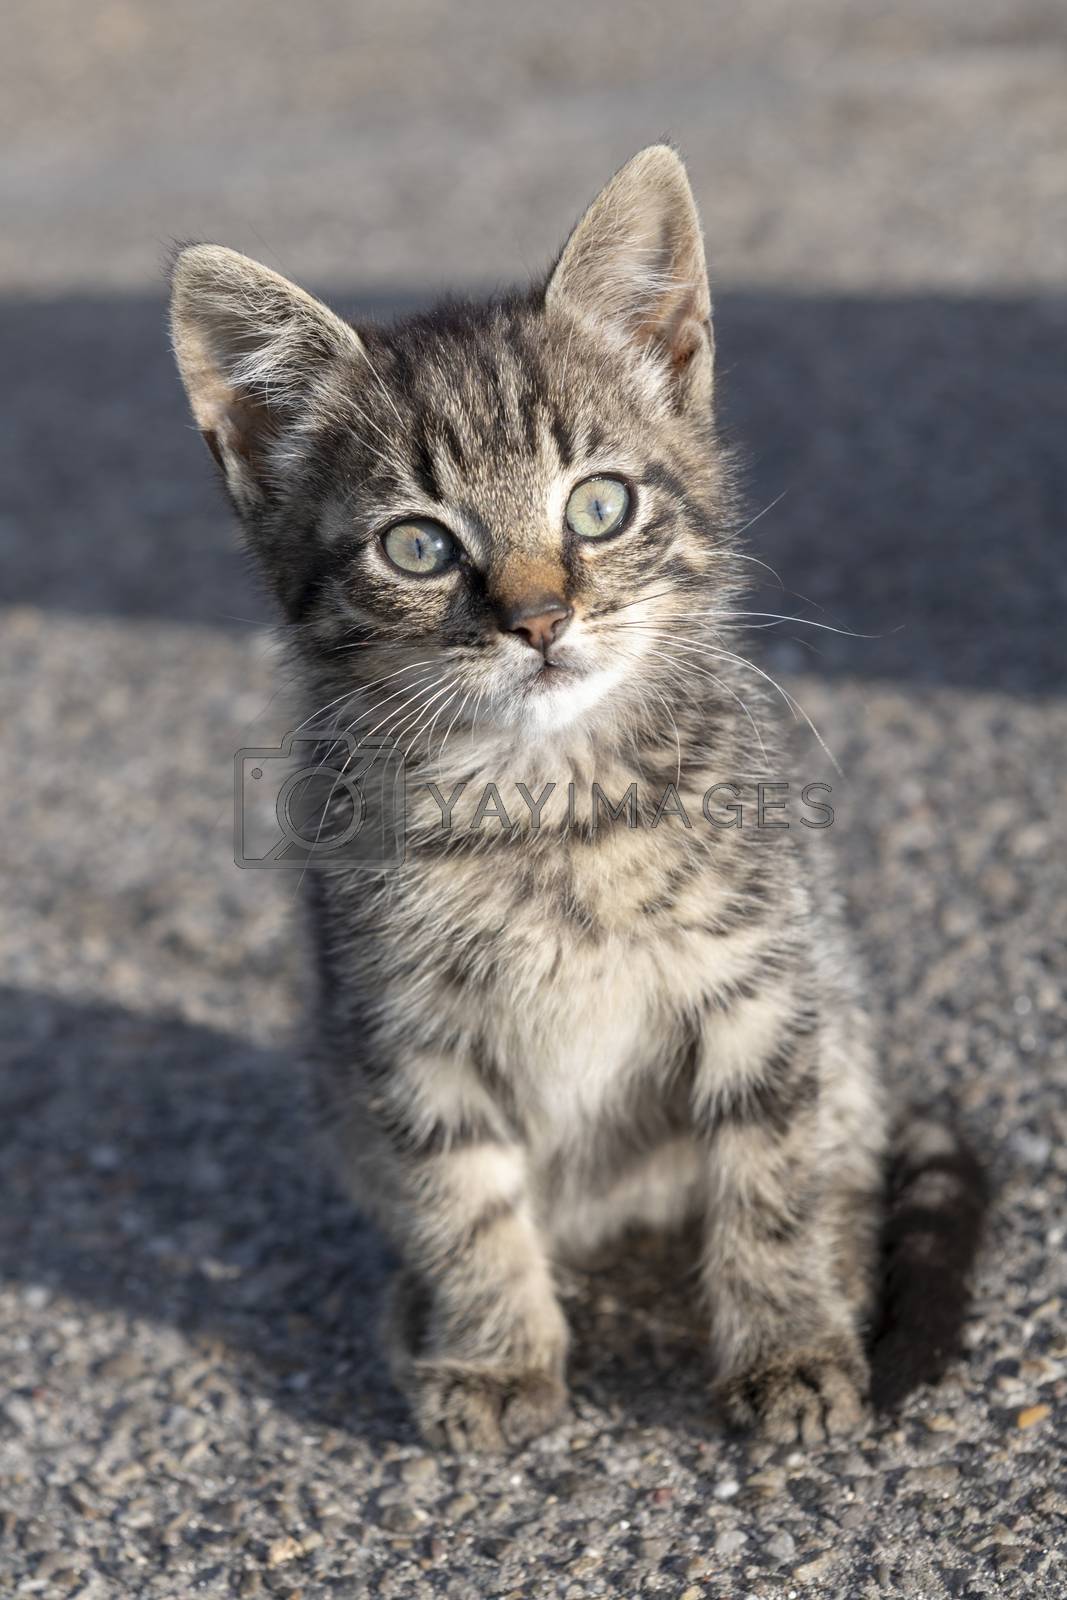 Royalty free image of Young kitten on a farm
 by Tofotografie